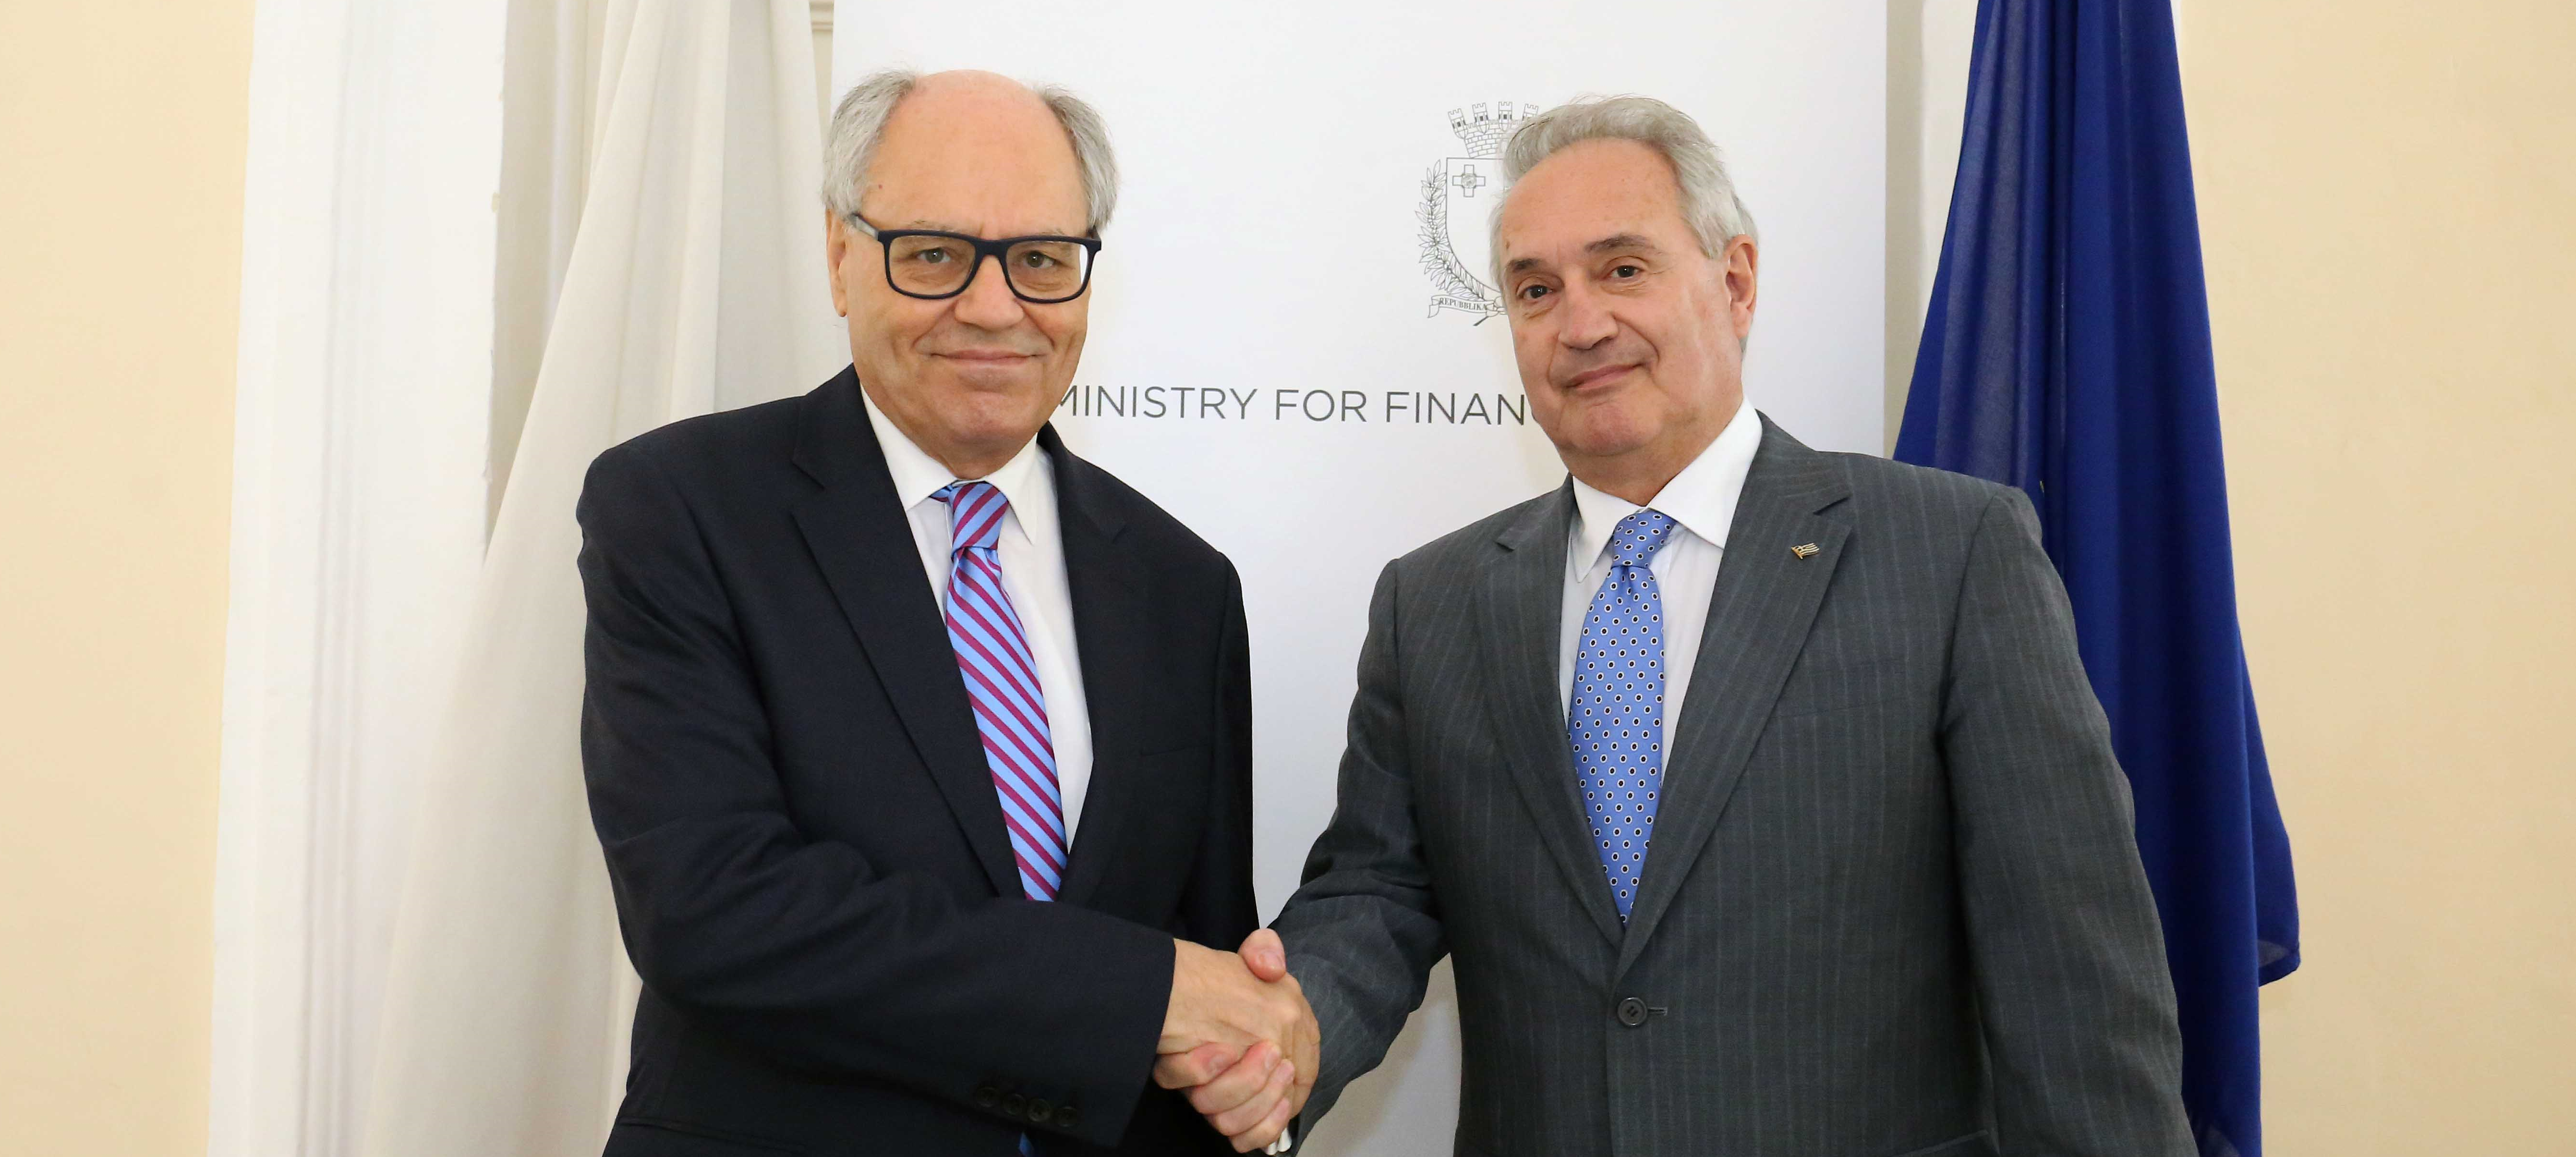 FINANCE MINISTER MEETS THE AMBASSADOR FOR THE HELLENIC REPUBLIC